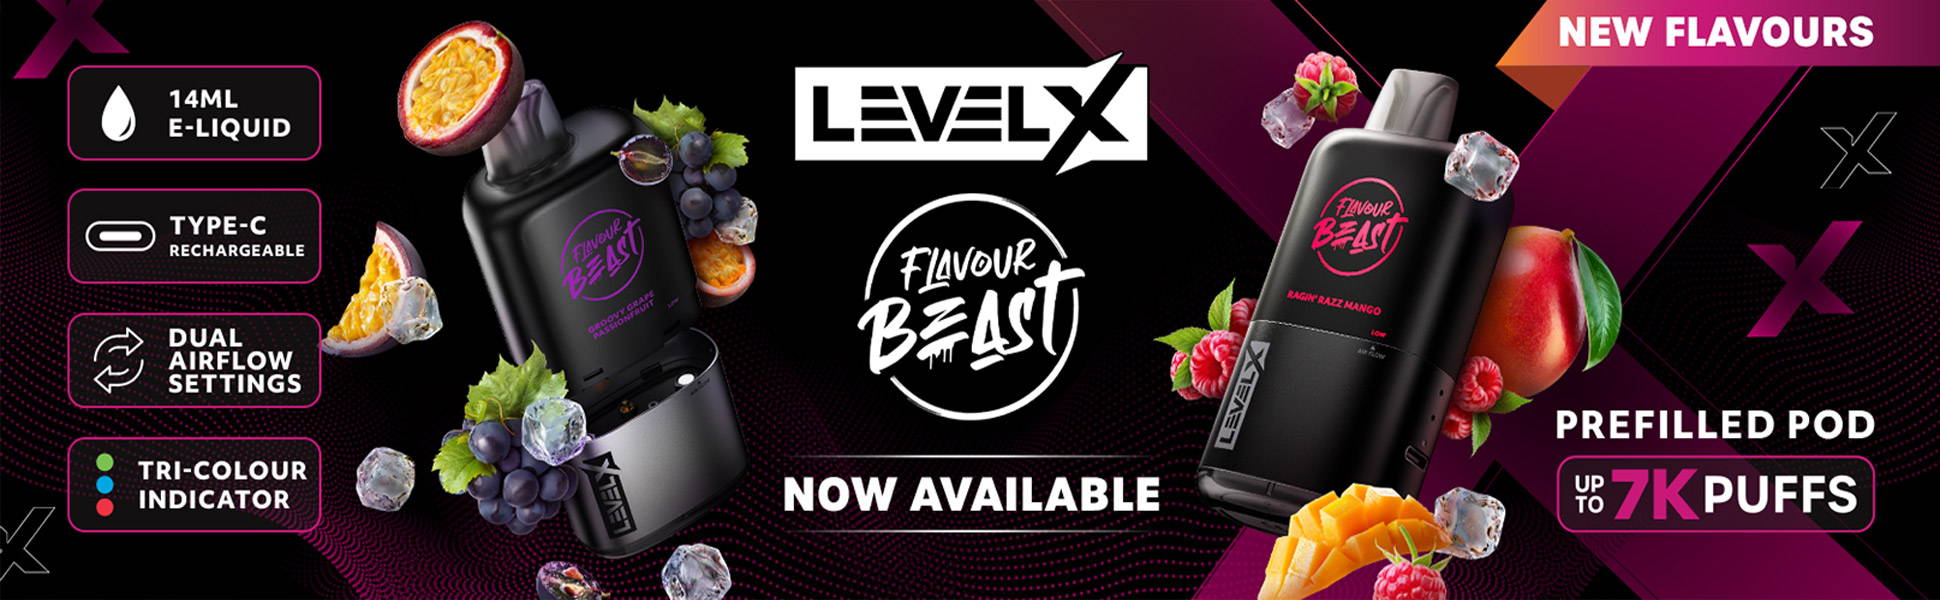 LEVEL X FLAVOUR BEAST PODS